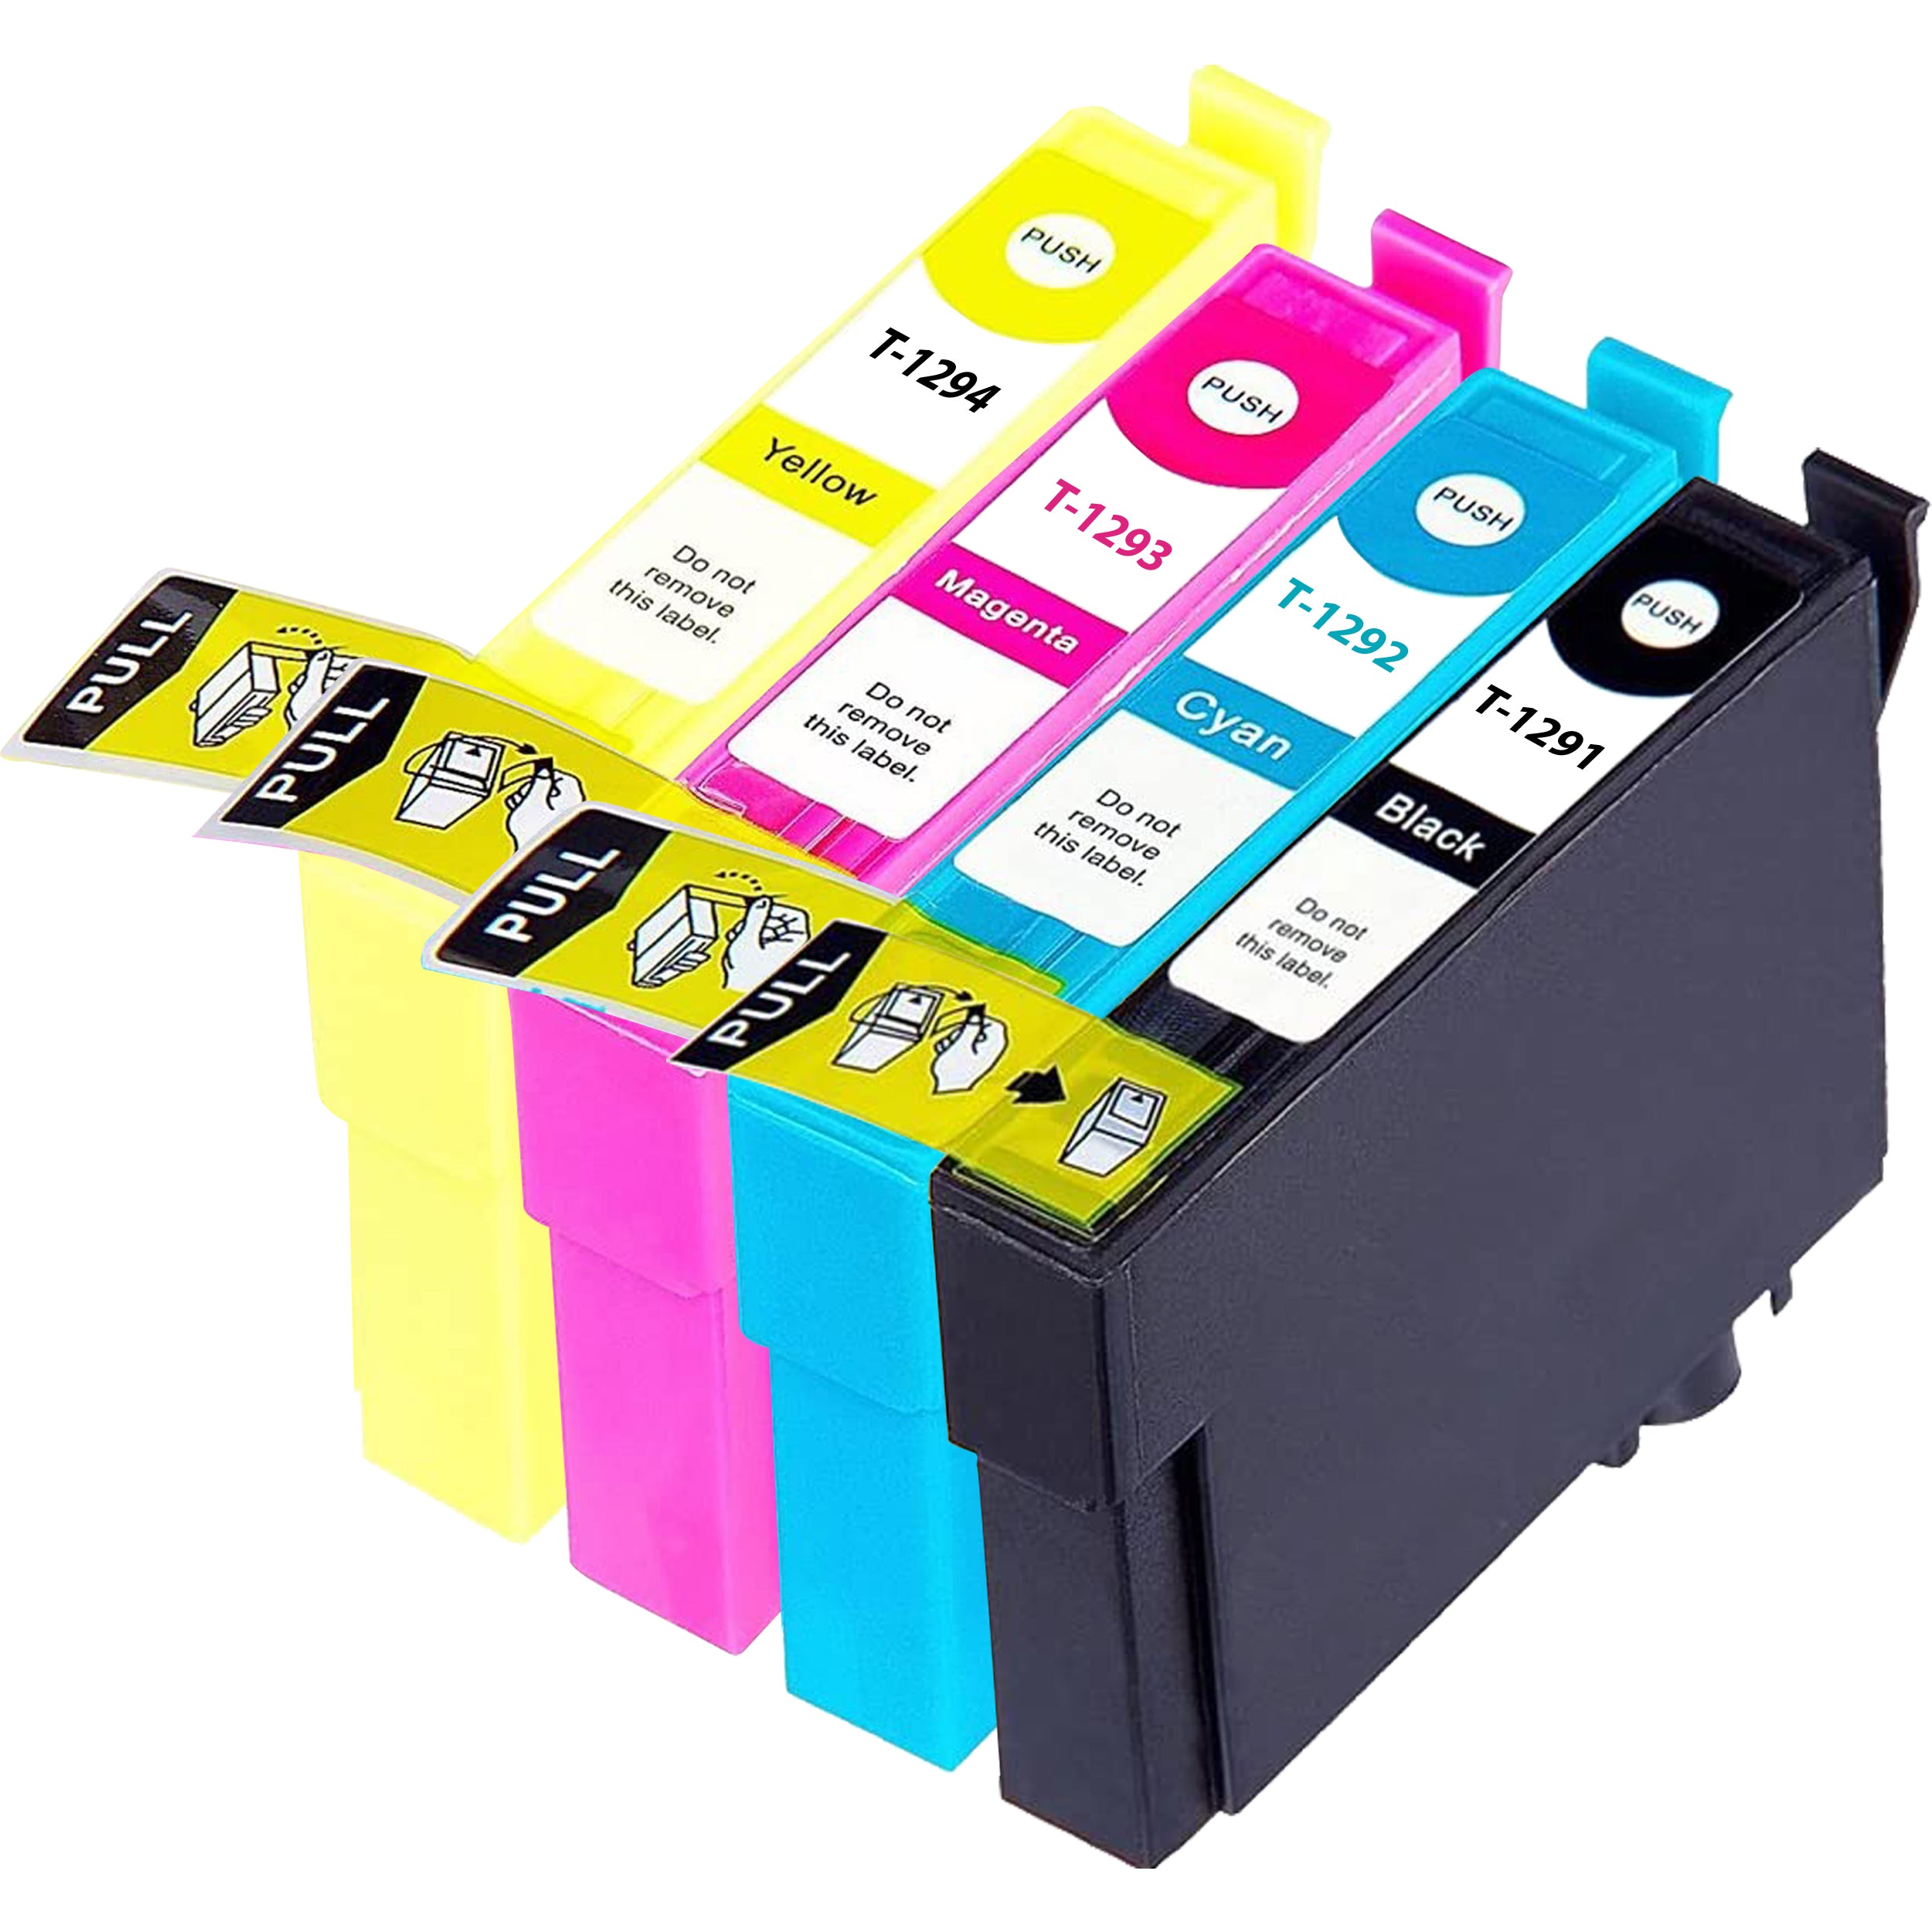 T1295 Multipack Ink Cartridges Replacement For T1291 T1292 T1293 T1294  Compatible For Epson Sx435w Sx235w Wf-3520 Wf-3540